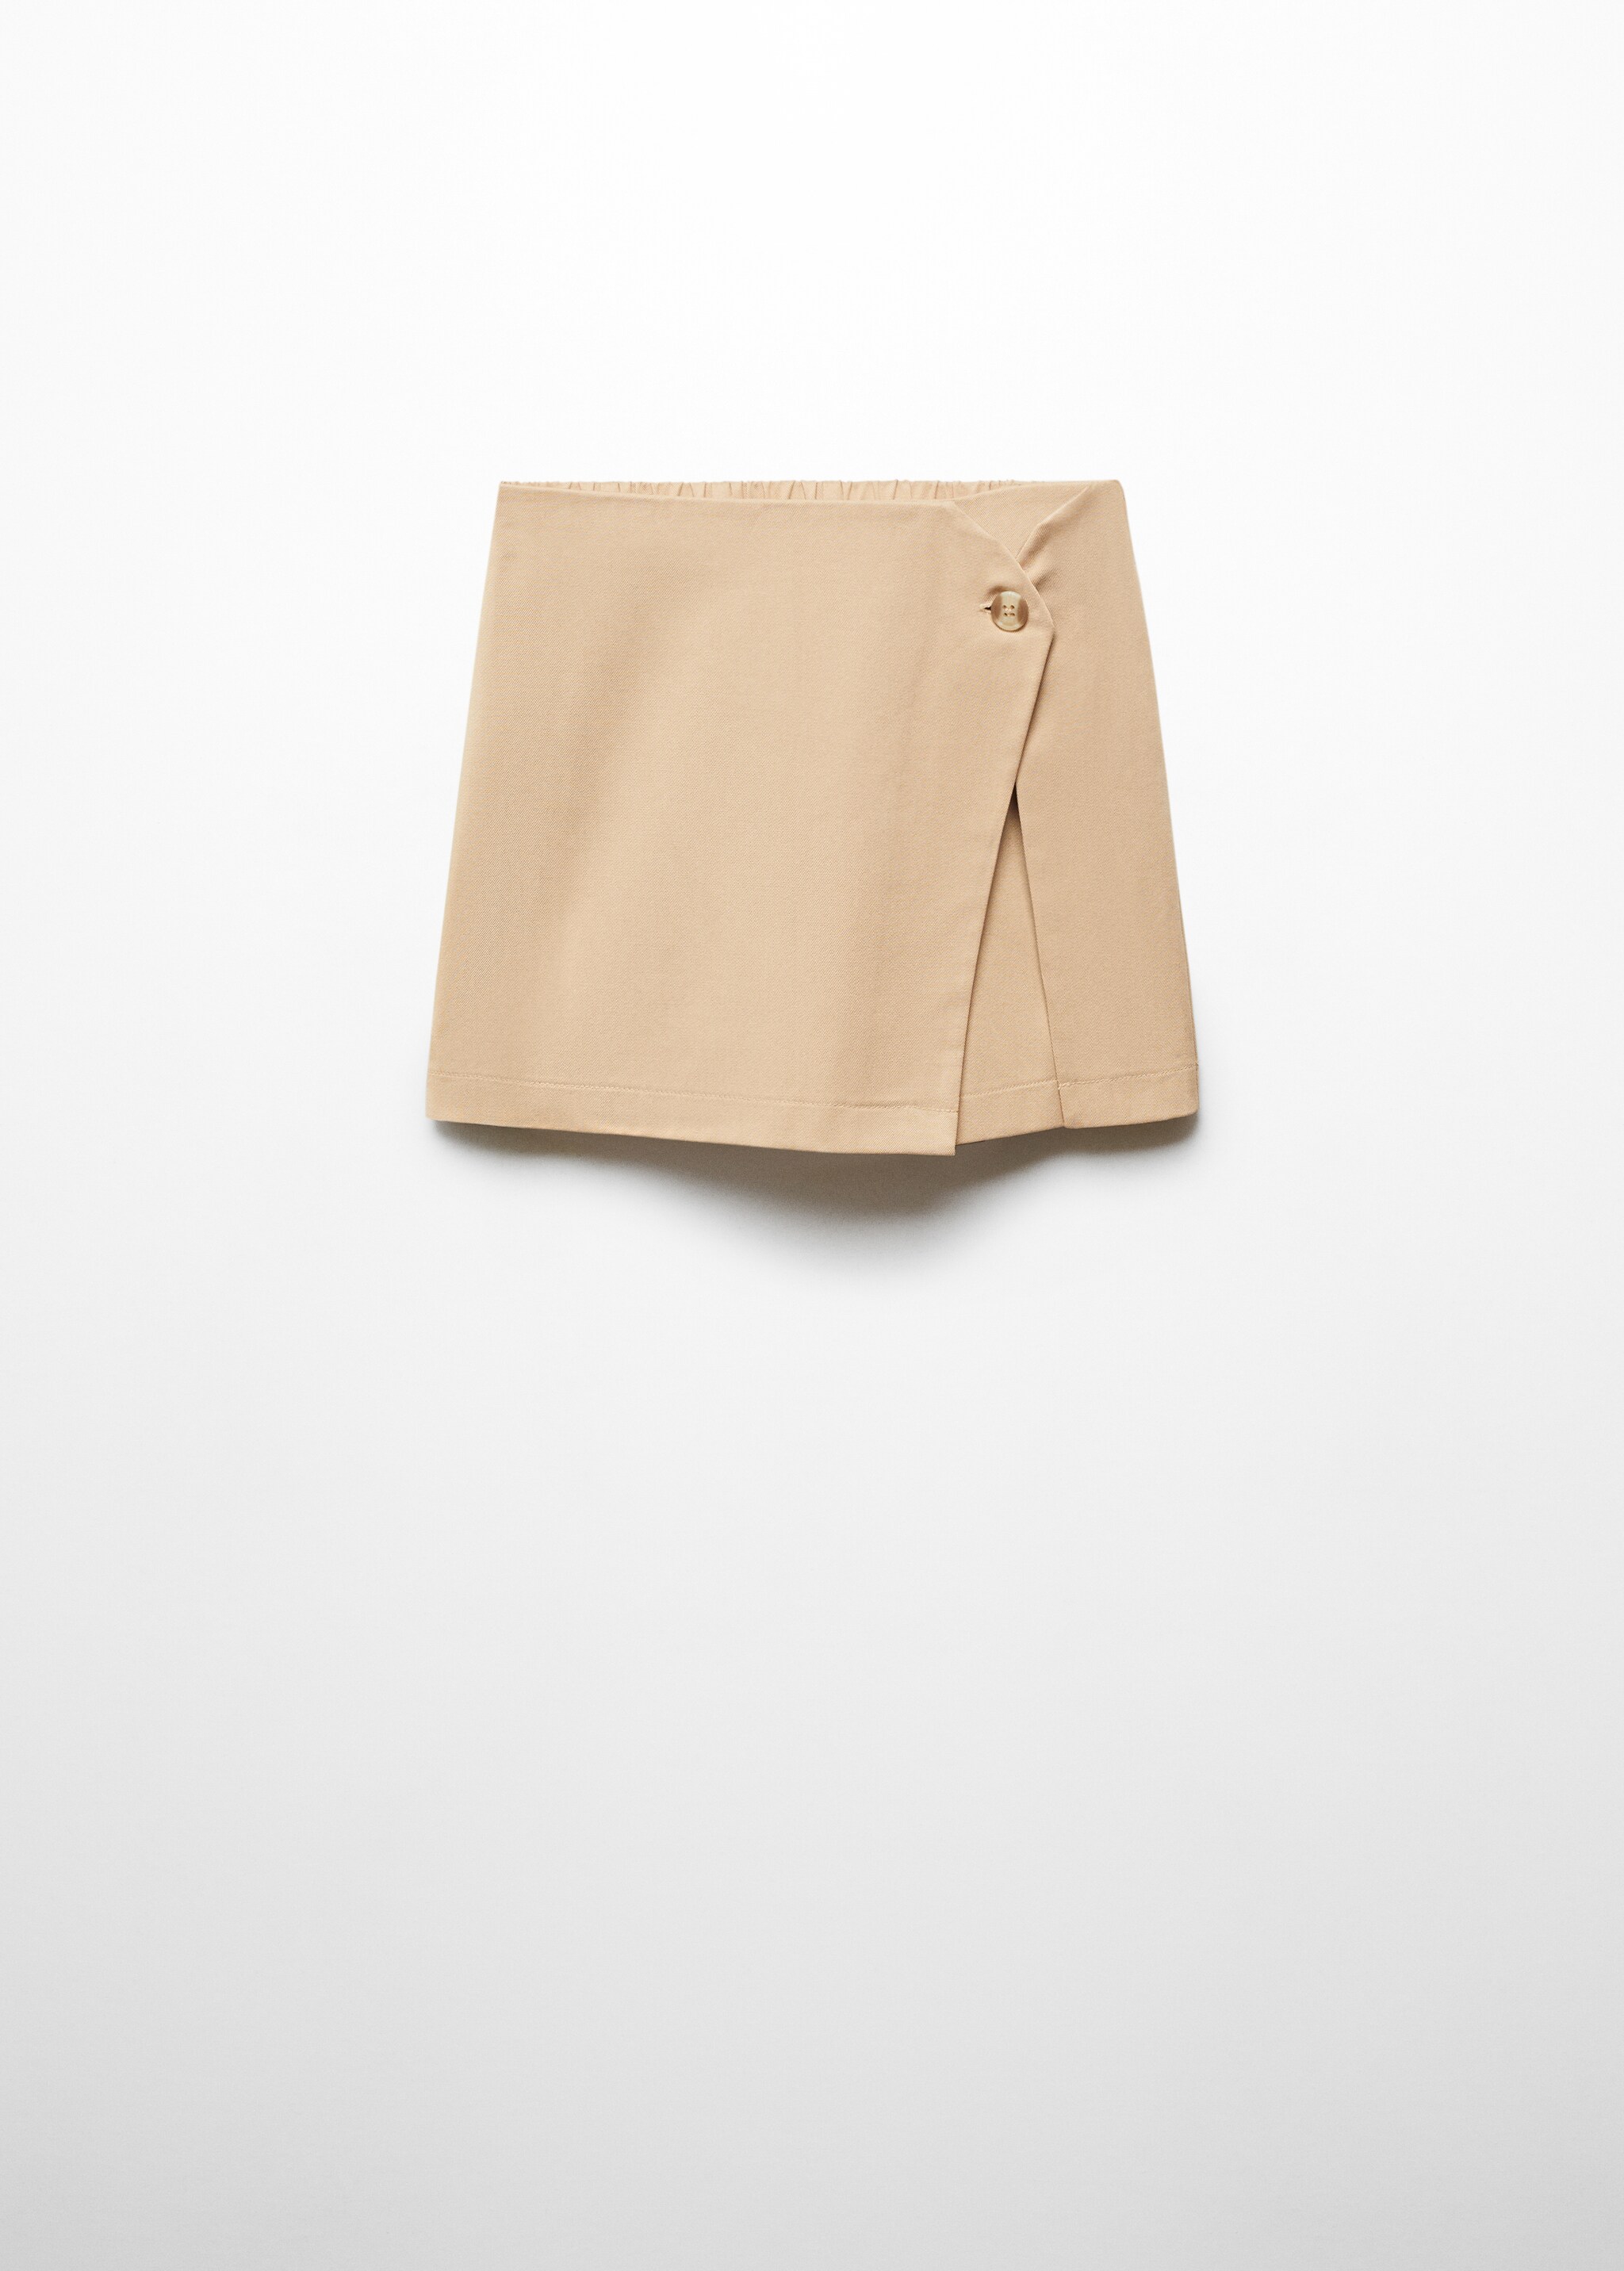 Wrapped skort - Article without model